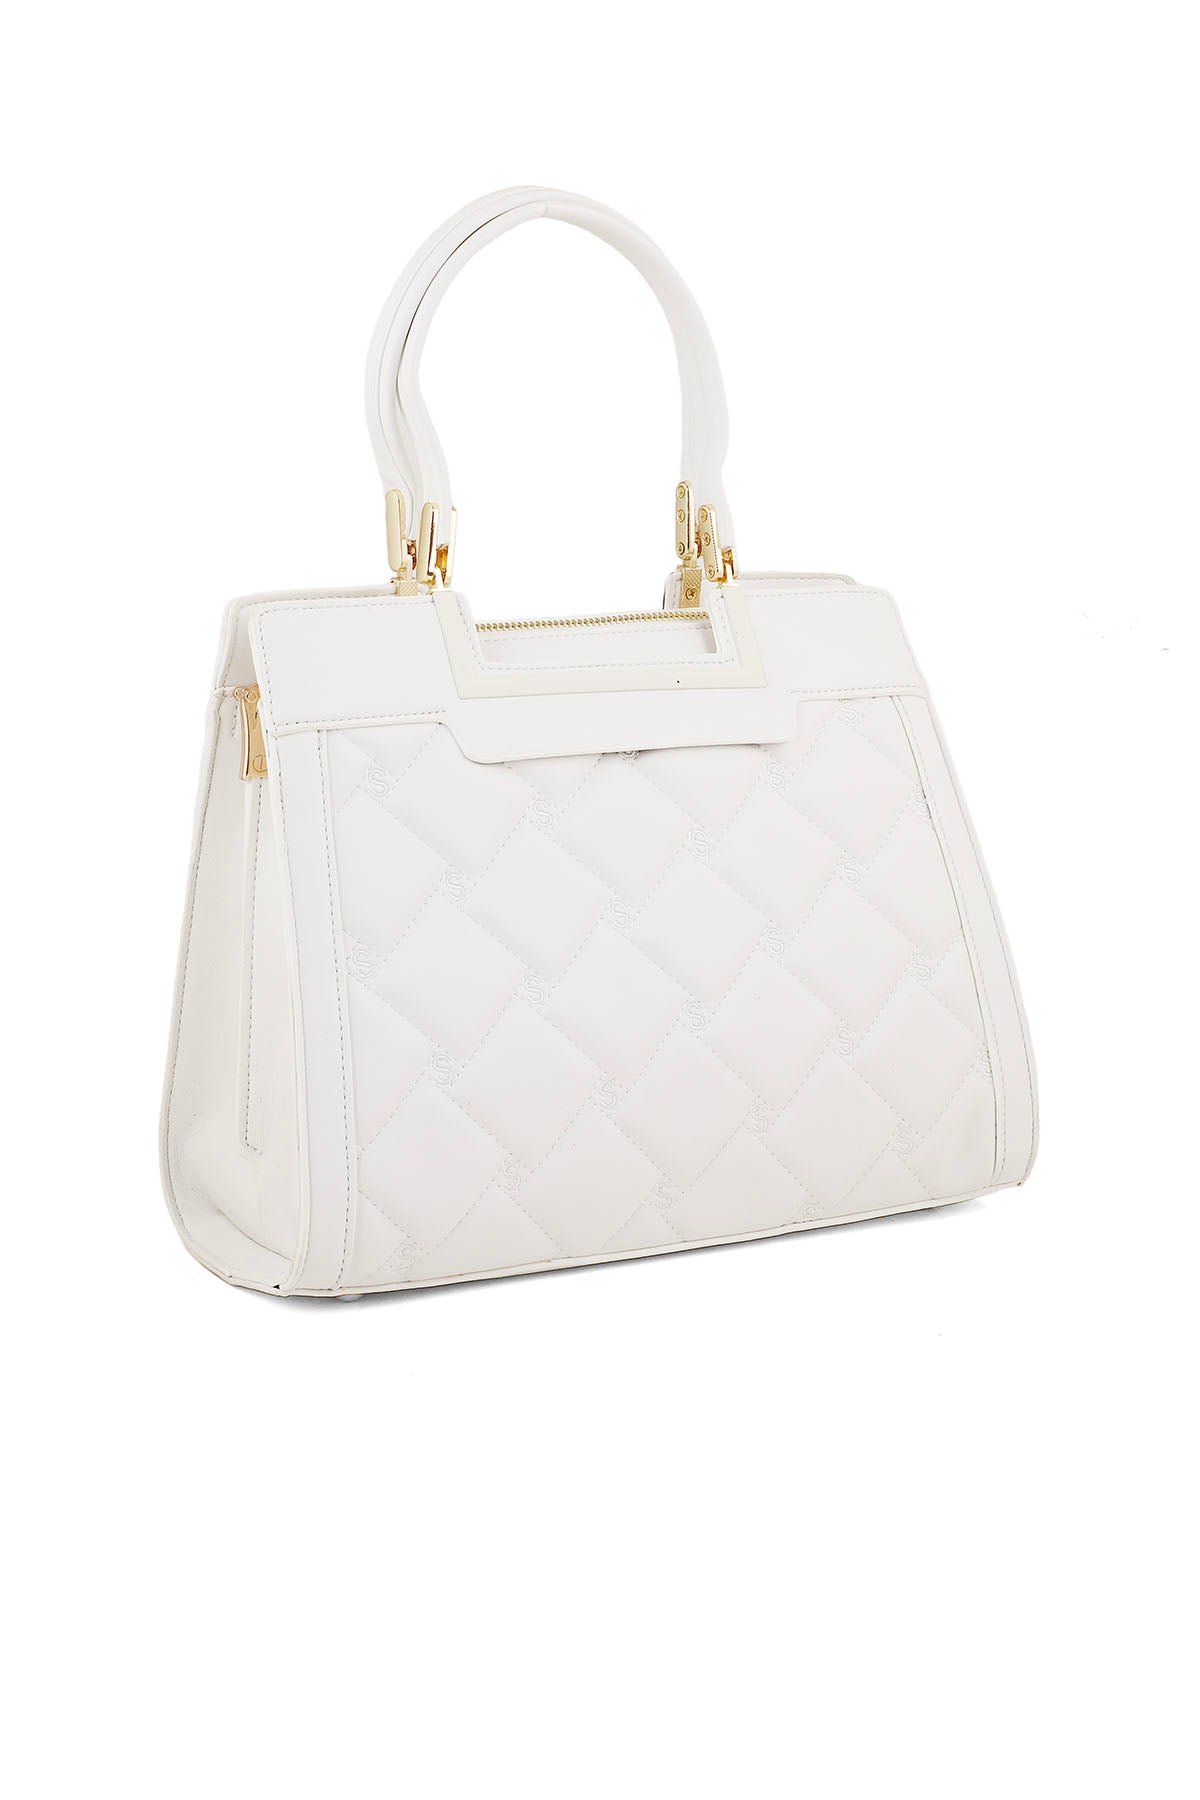 Formal Tote Hand Bags B15094-White